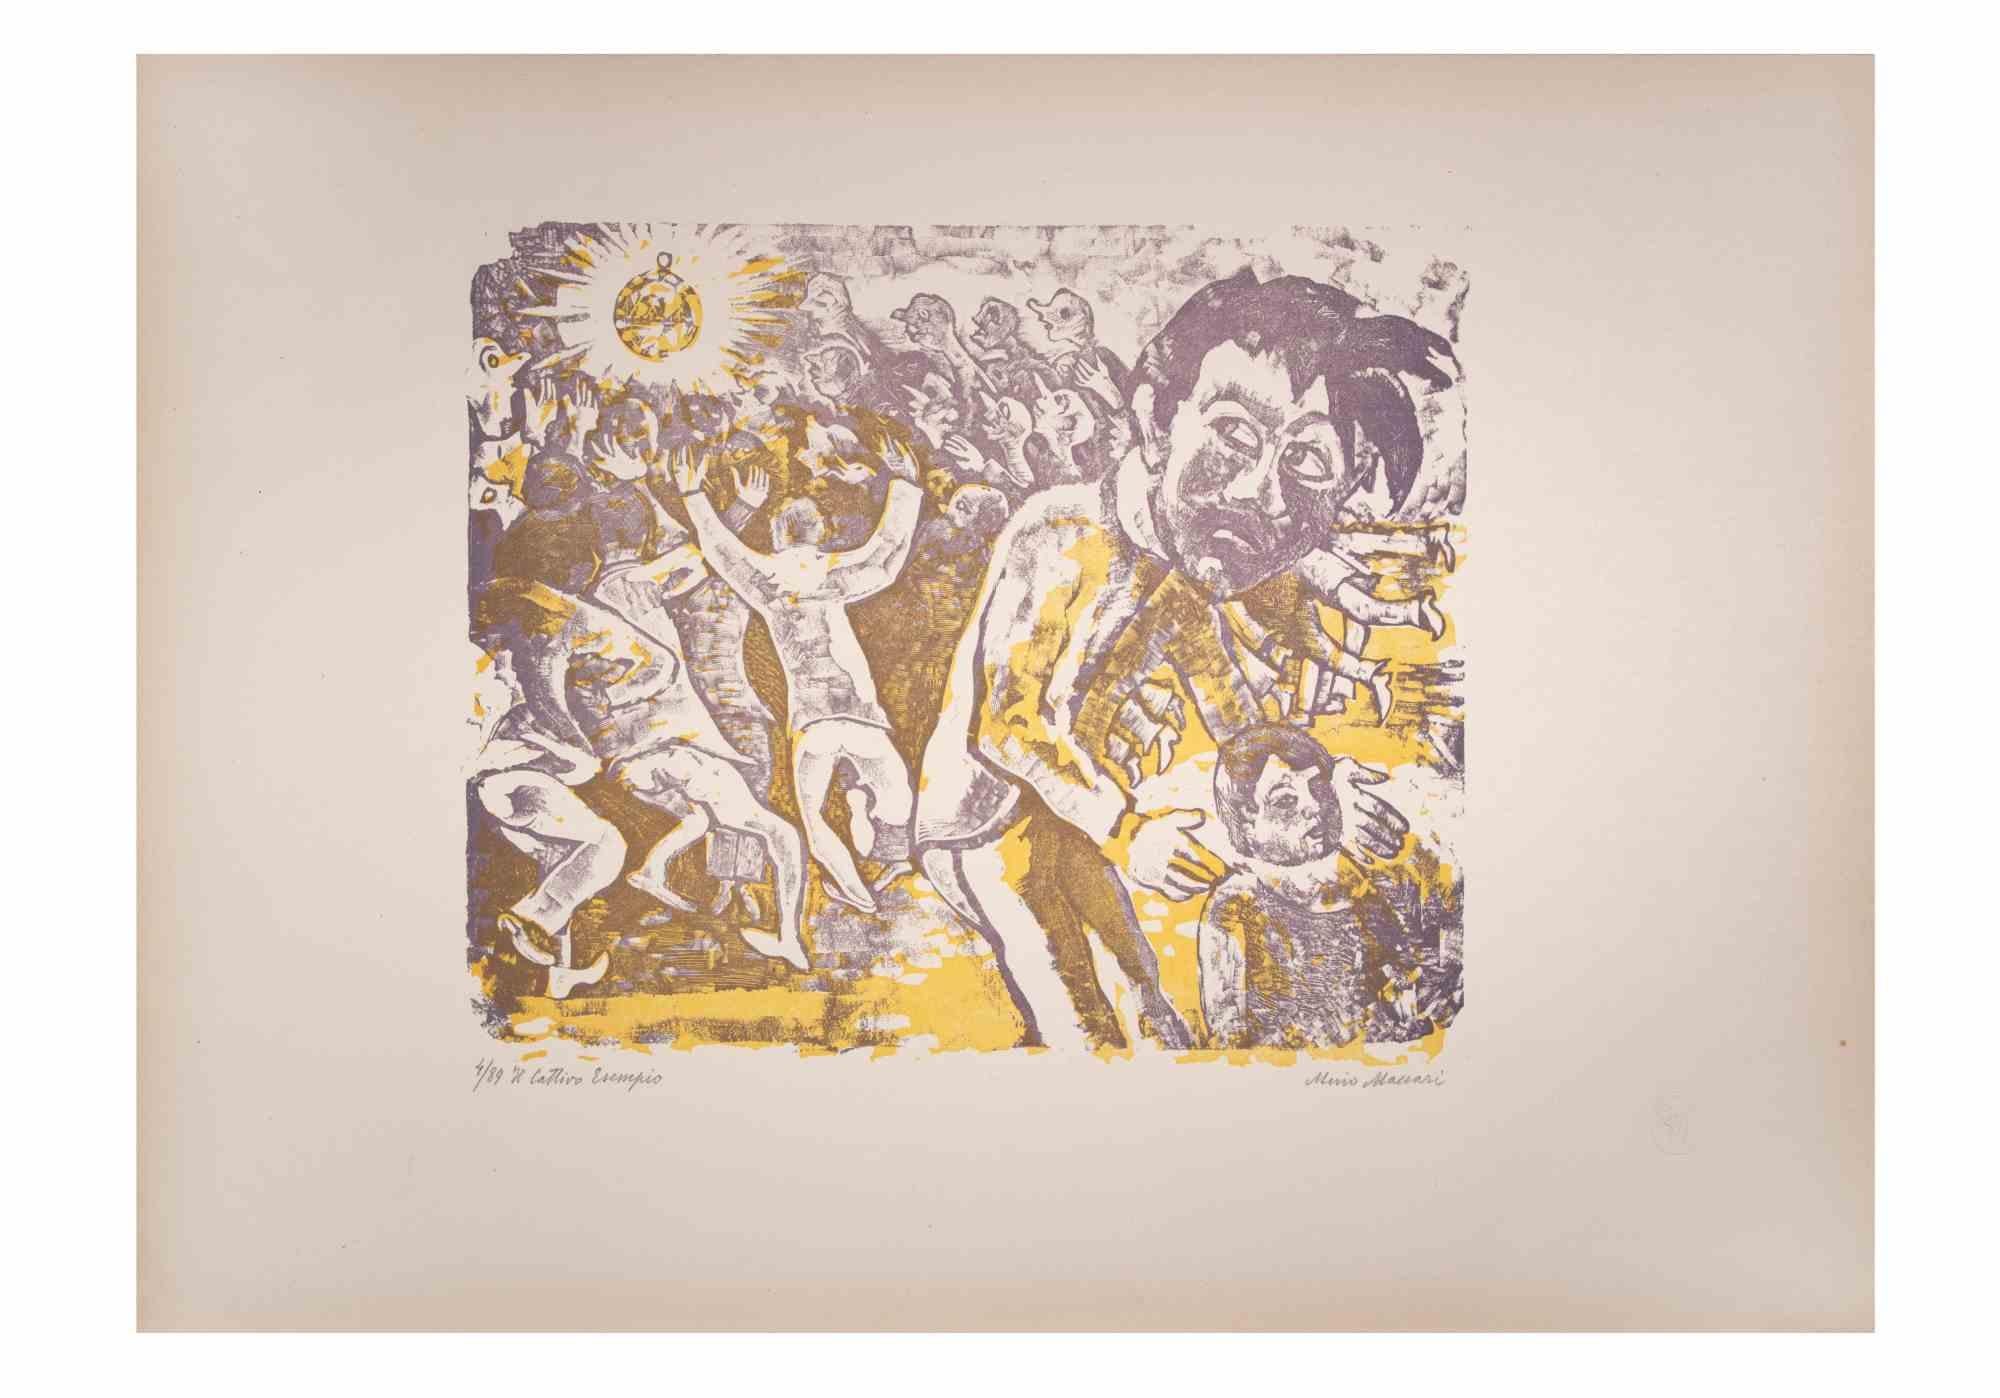 The bad influence is an Artwork realized by Mino Maccari  (1924-1989) in the Mid-20th Century.

Colored woodcut on paper. Hand-signed on the lower, numbered 4/89 specimens and titled on the left margin.

Good conditions.

Mino Maccari (Siena,